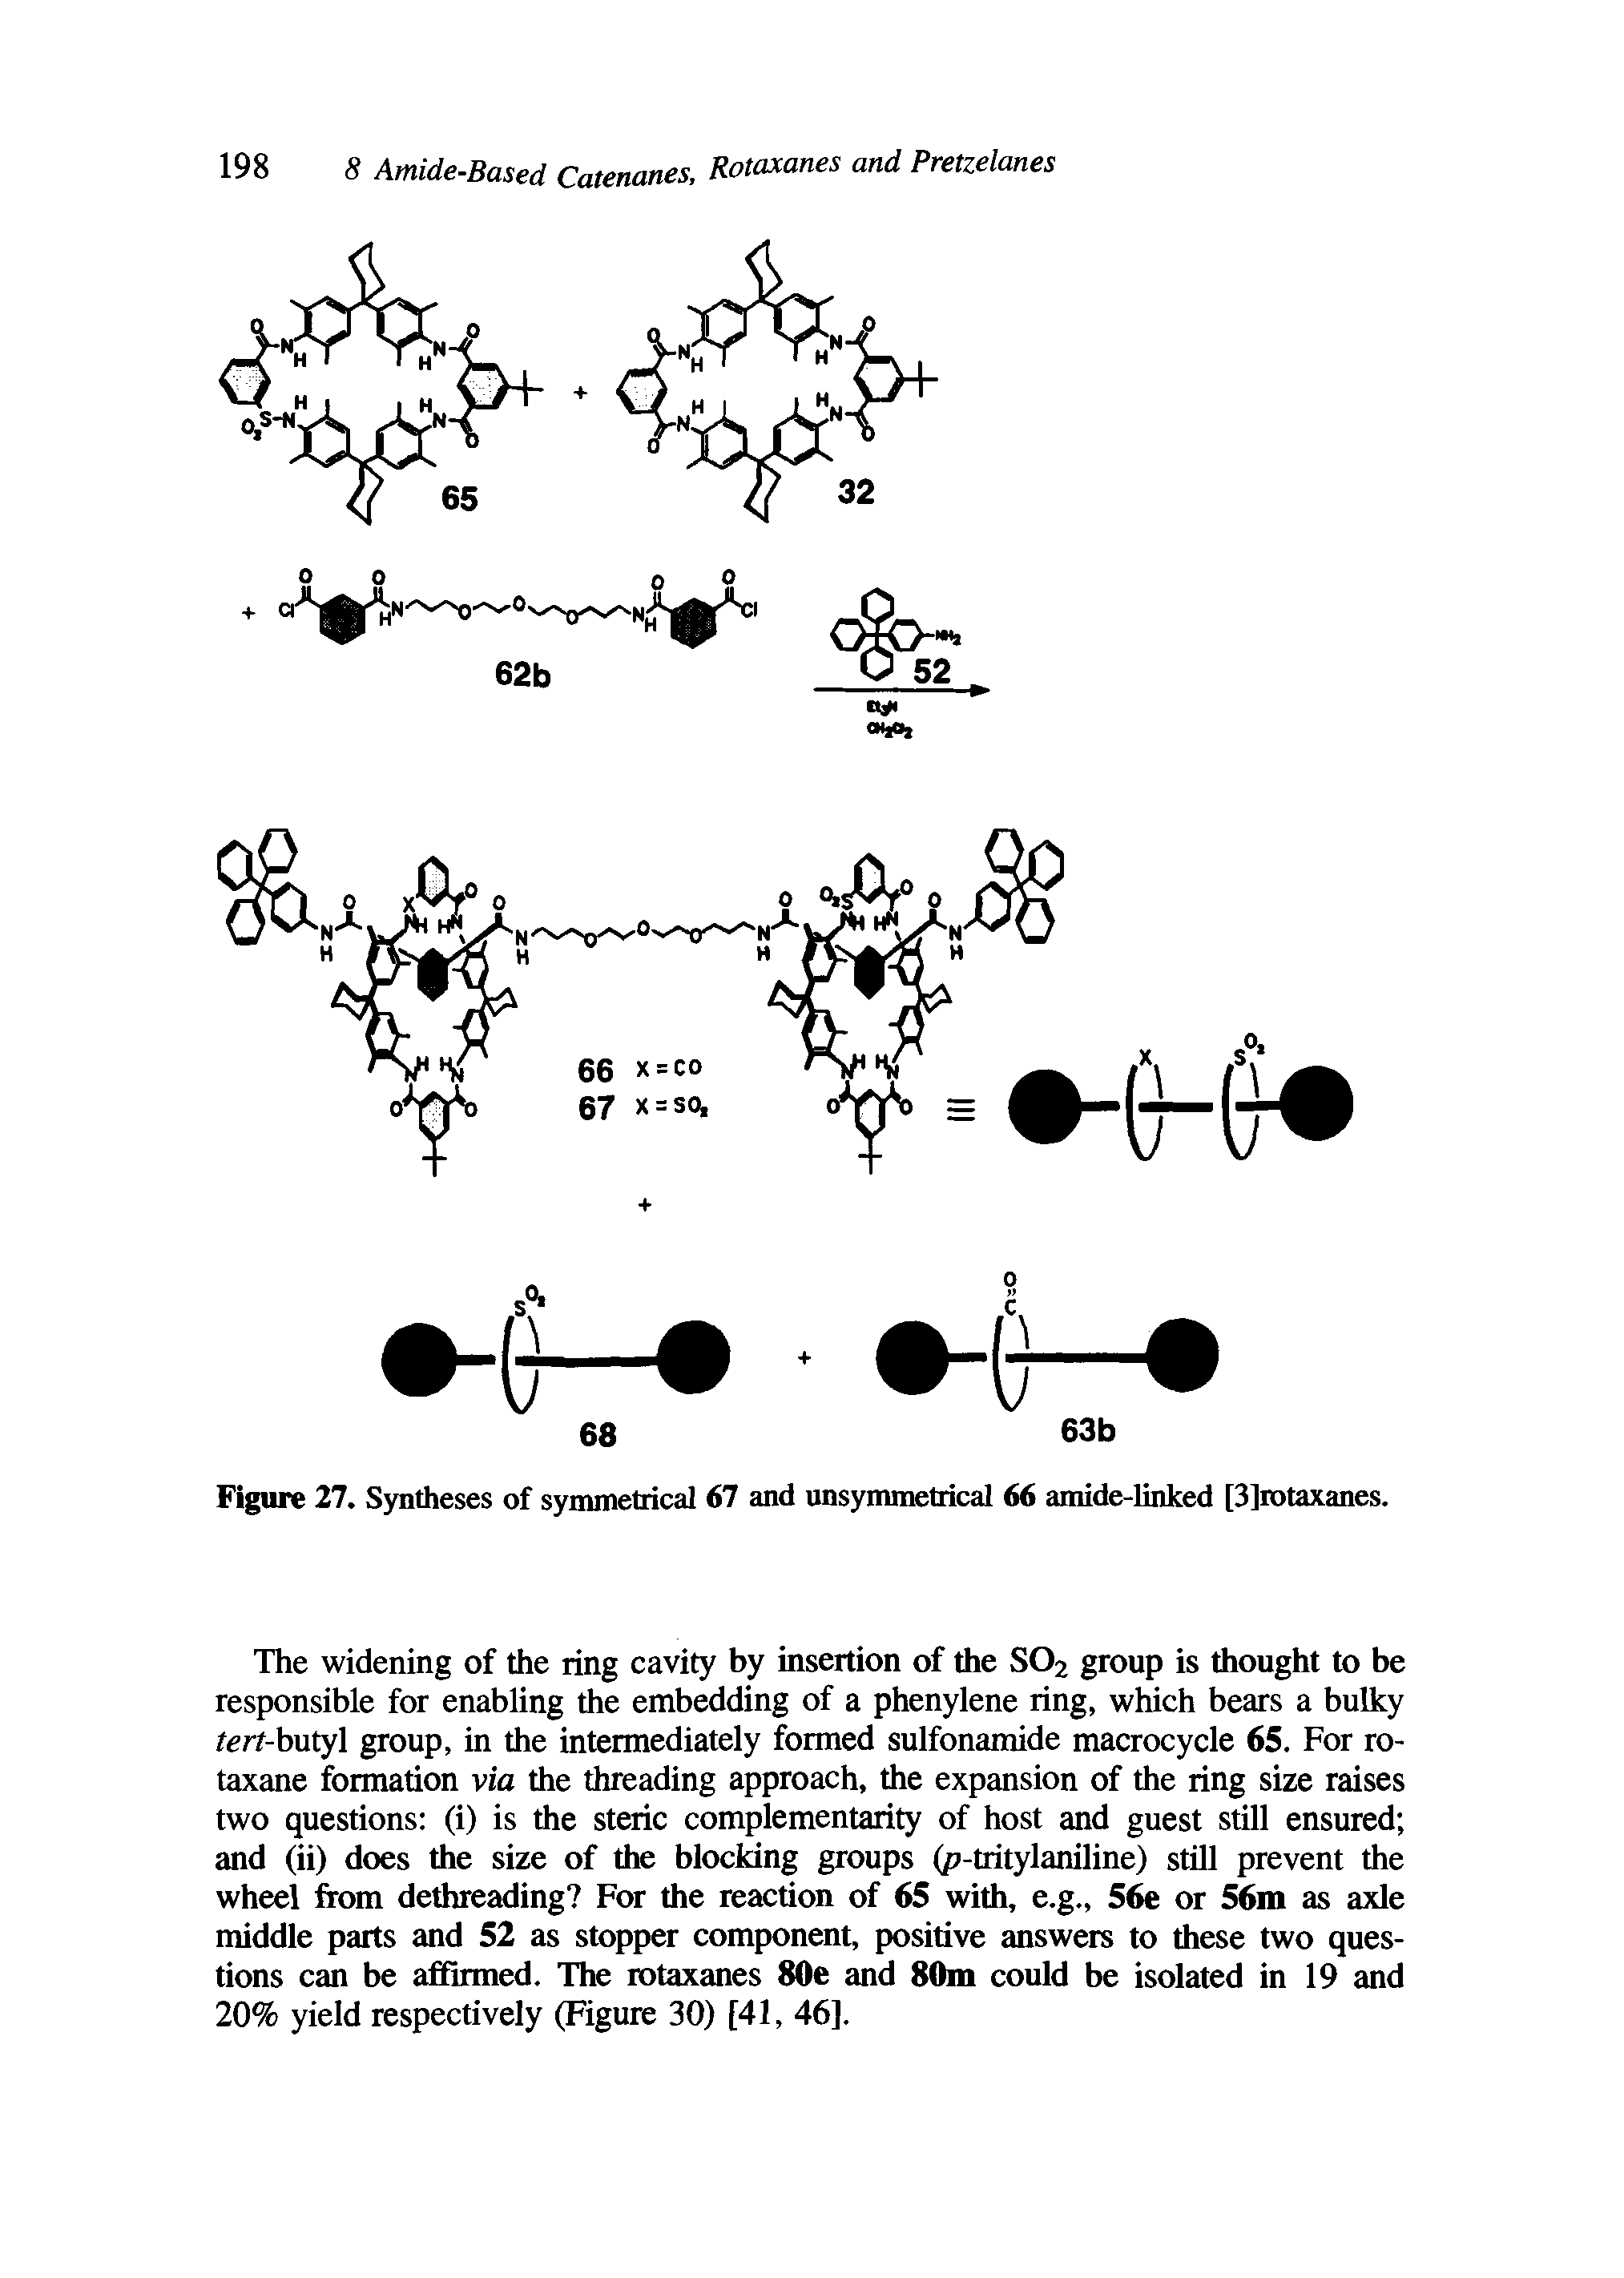 Figure 27. Syntheses of symmetrical 67 and unsymmetrical 66 amide-linked [3]rotaxanes.